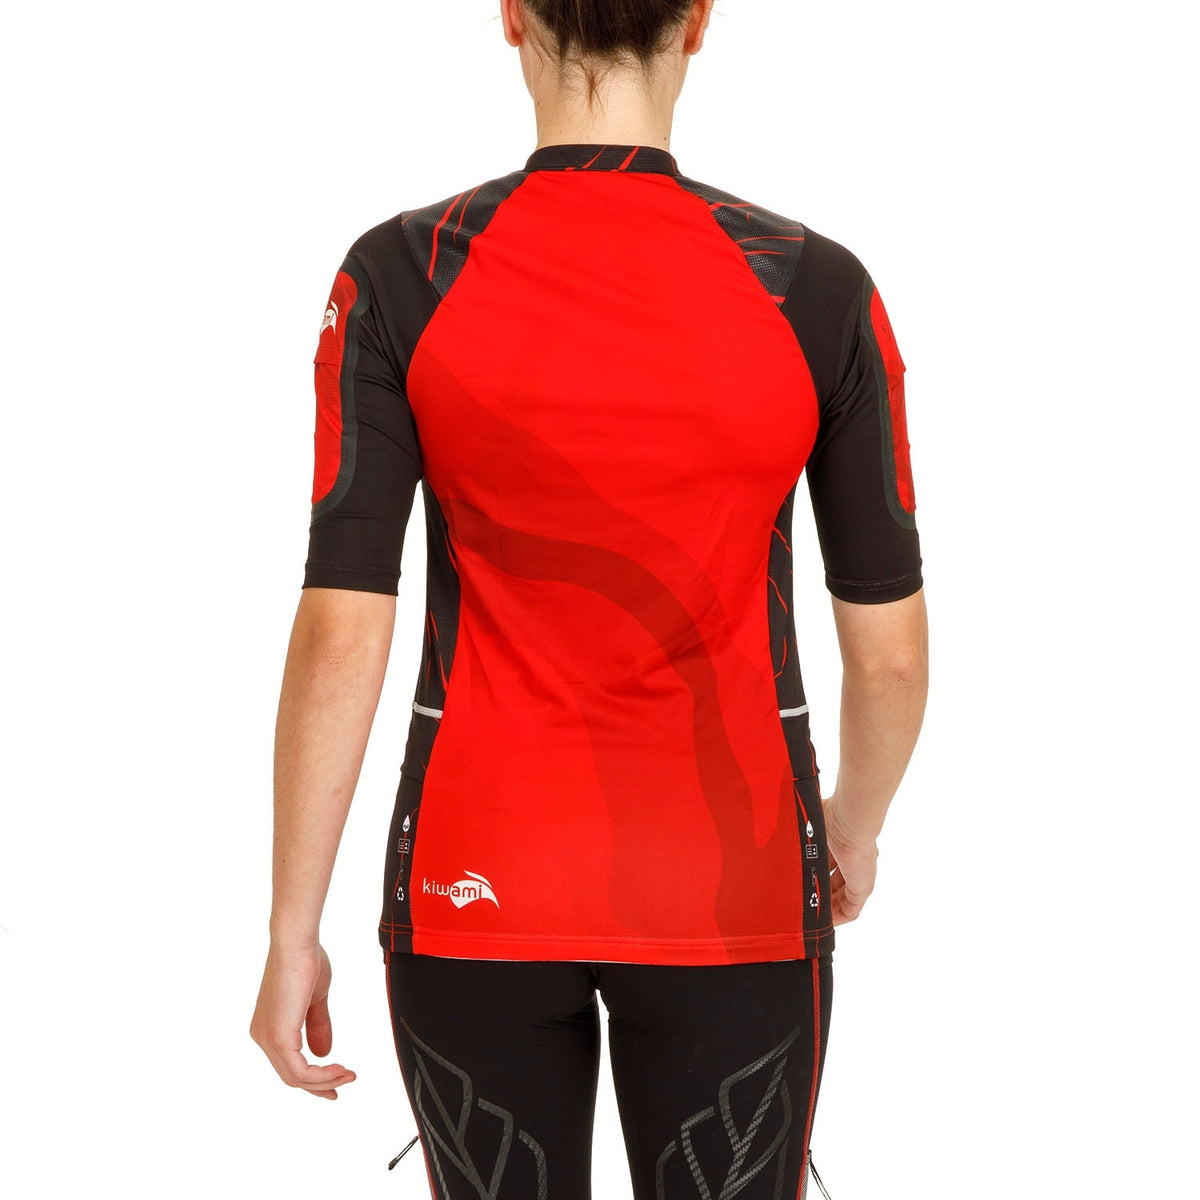 high_trail_red_equilibrium_technical_race_breathing_short_sleeves_french_manufacture_kiwami_sports